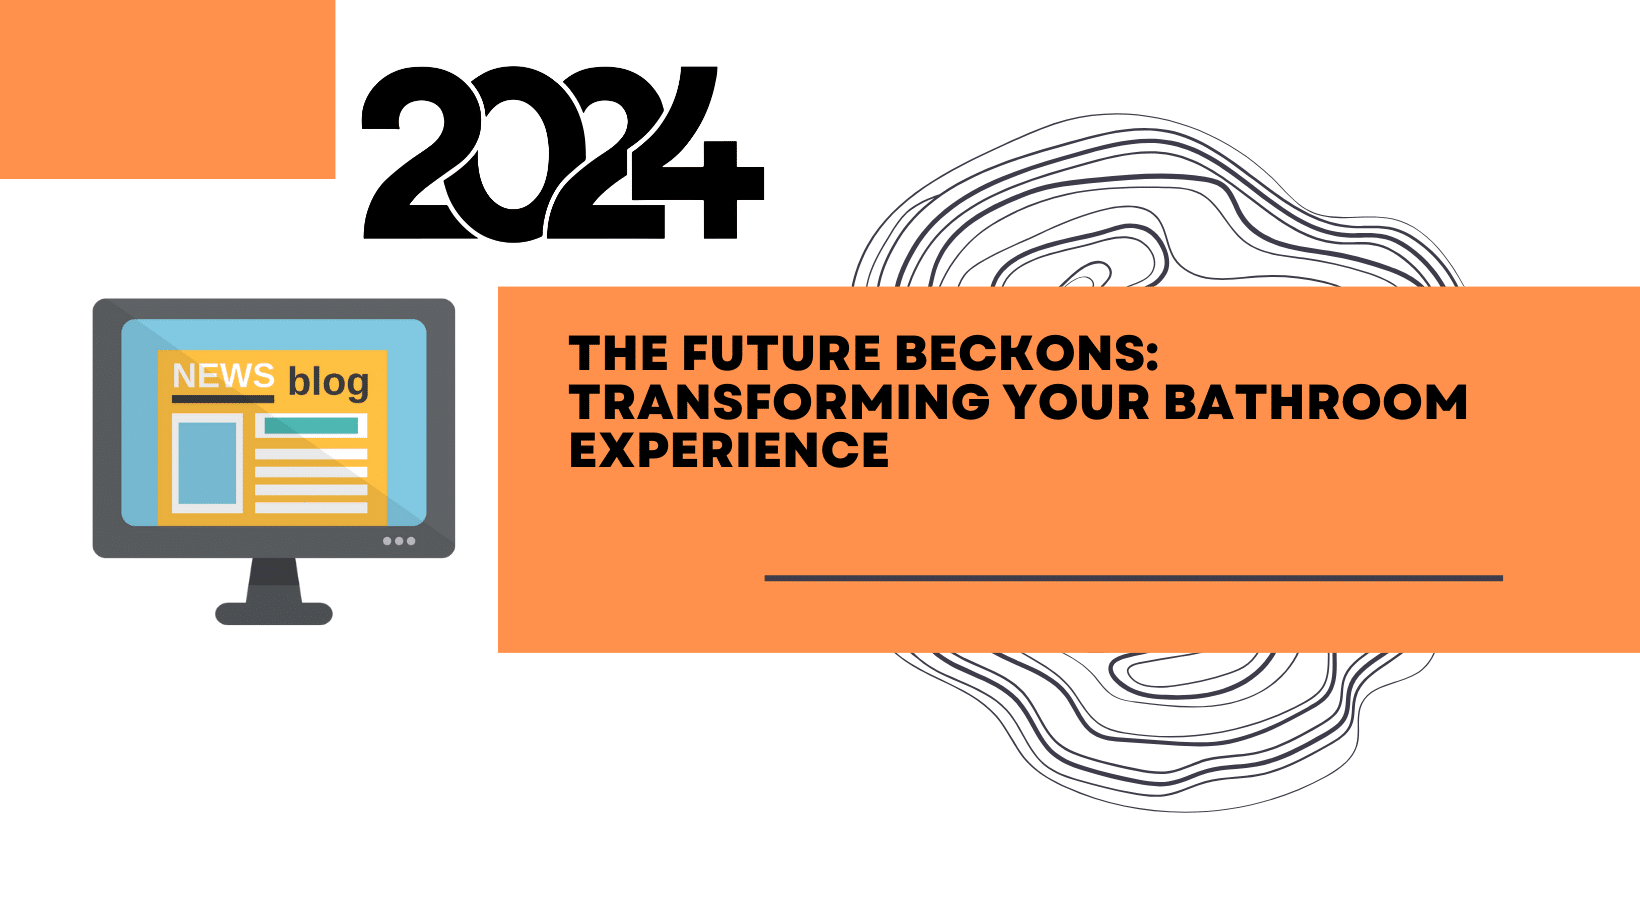 The Future Beckons: Transforming Your Bathroom Experience